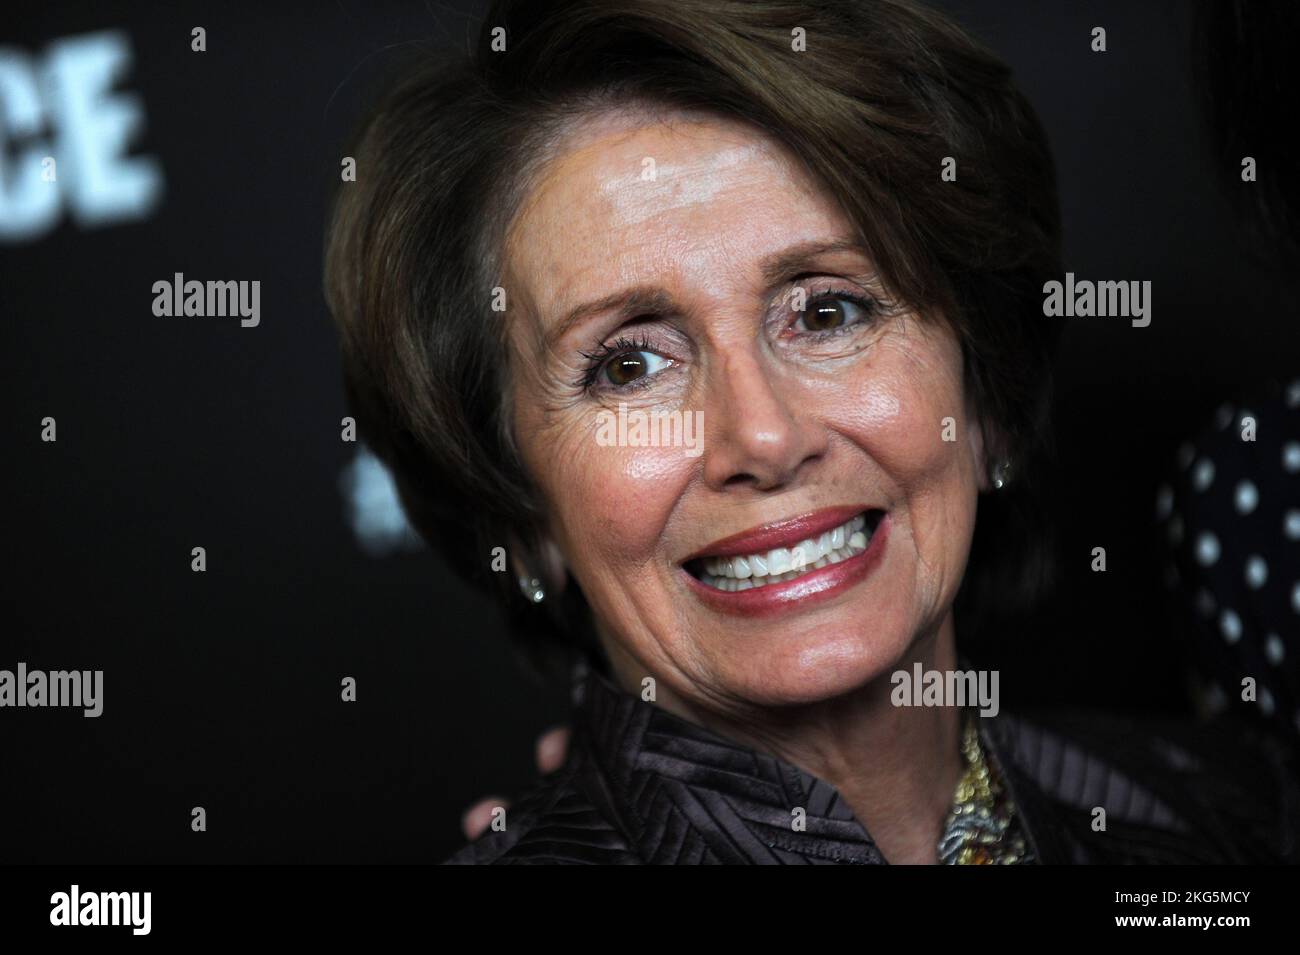 Manhattan, United States Of America. 31st Dec, 2008. NEW YORK, NY - MARCH 21: Nancy Pelosi attends the New York premiere of the HBO documentary Fall to Grace at Time Warner Center Screening Room on March 21, 2013 in New York City. People: Nancy Pelosi Credit: Storms Media Group/Alamy Live News Stock Photo